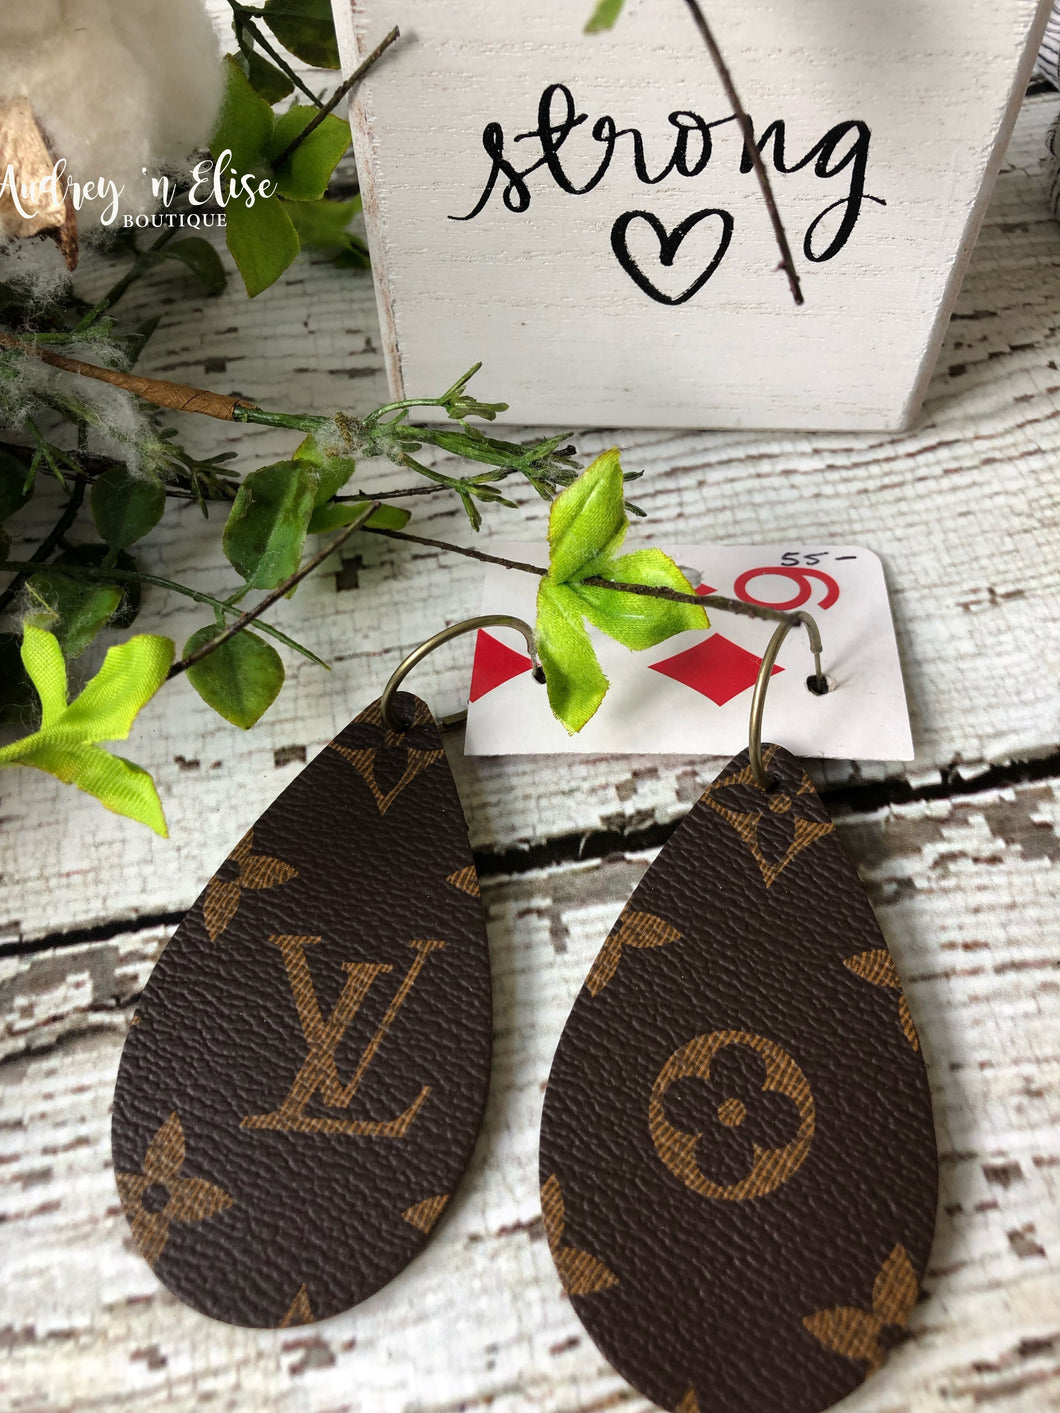 LOUIS VUITTON Idylle Blossom Studs, 3 Golds And Diamonds Gold. Size Nsa